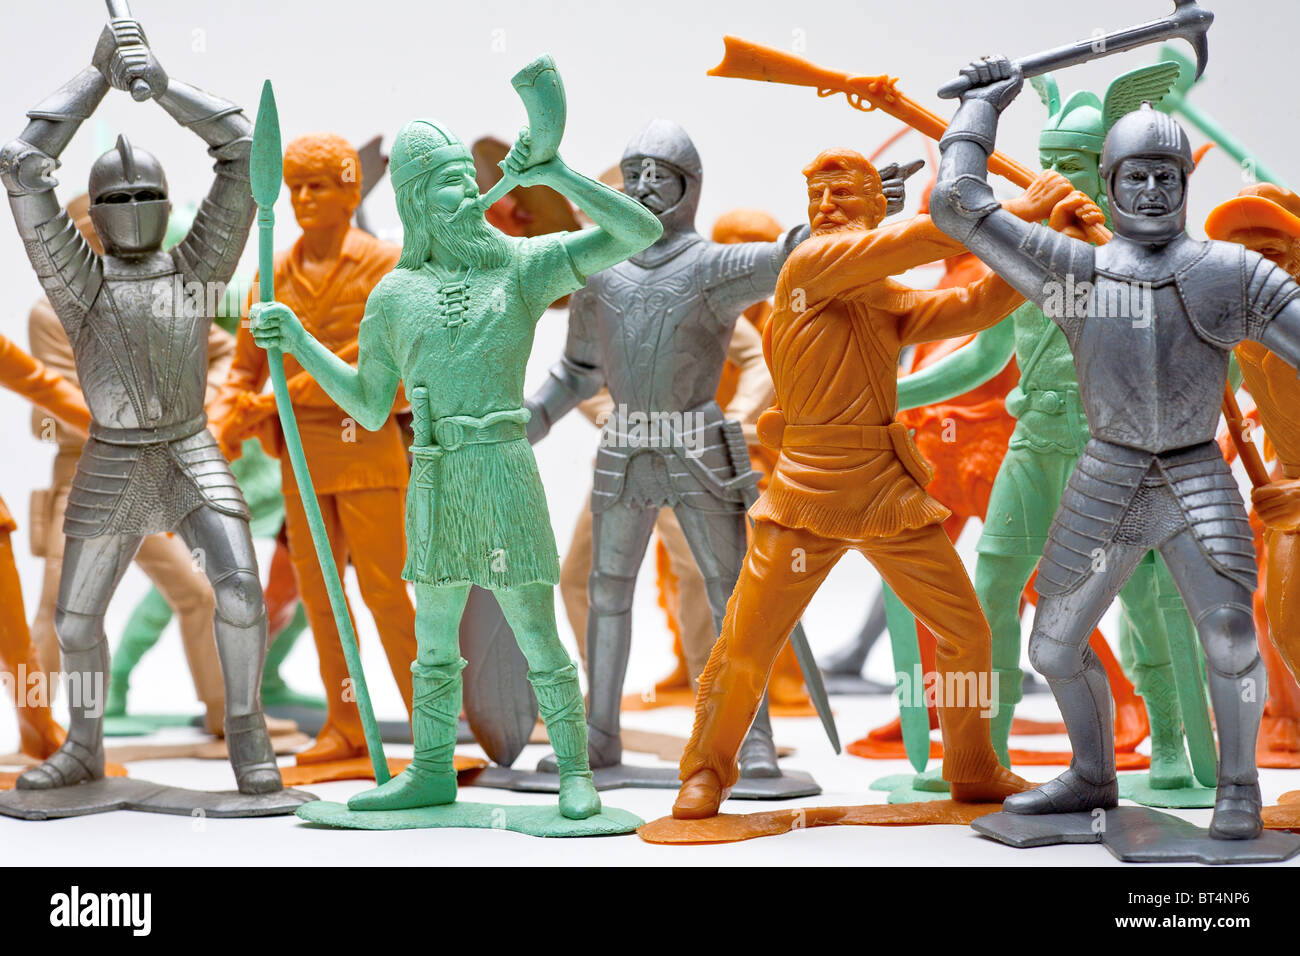 Bunch of Toy Soldiers. Stock Photo